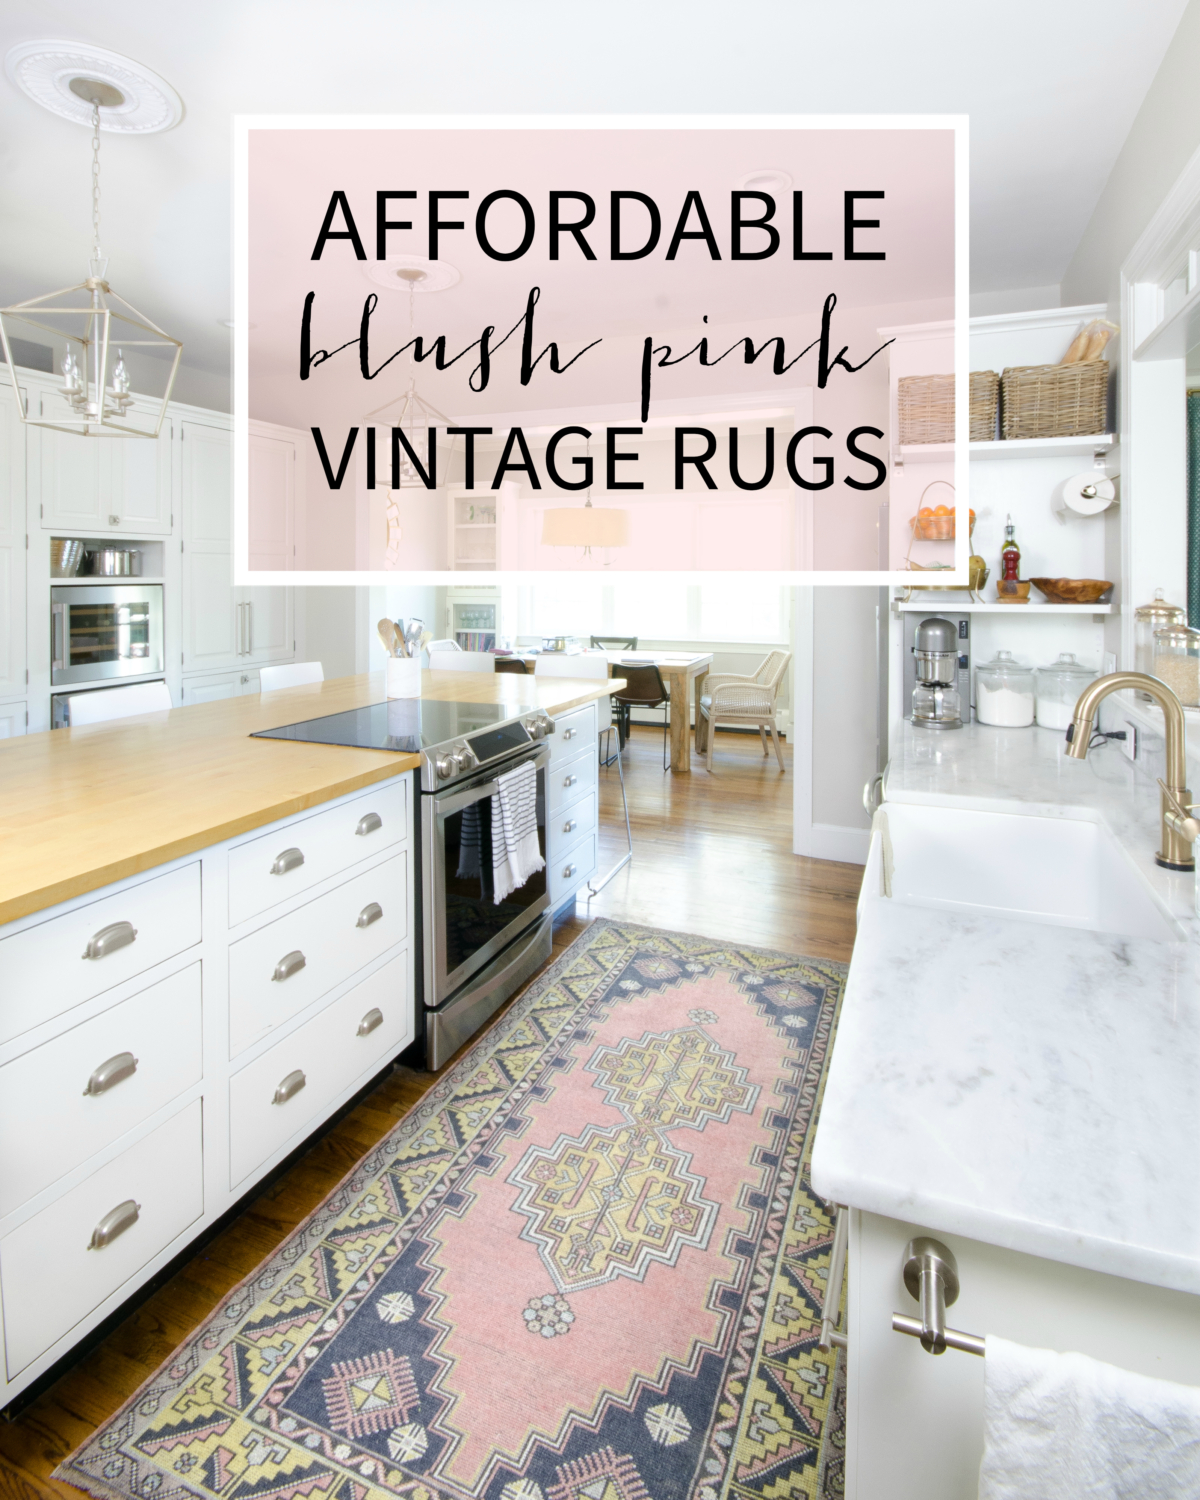 Blush vintage rug in a classic white kitchen, plus sources for similar vintage Turkish rugs in a variety of sizes, all affordably priced!